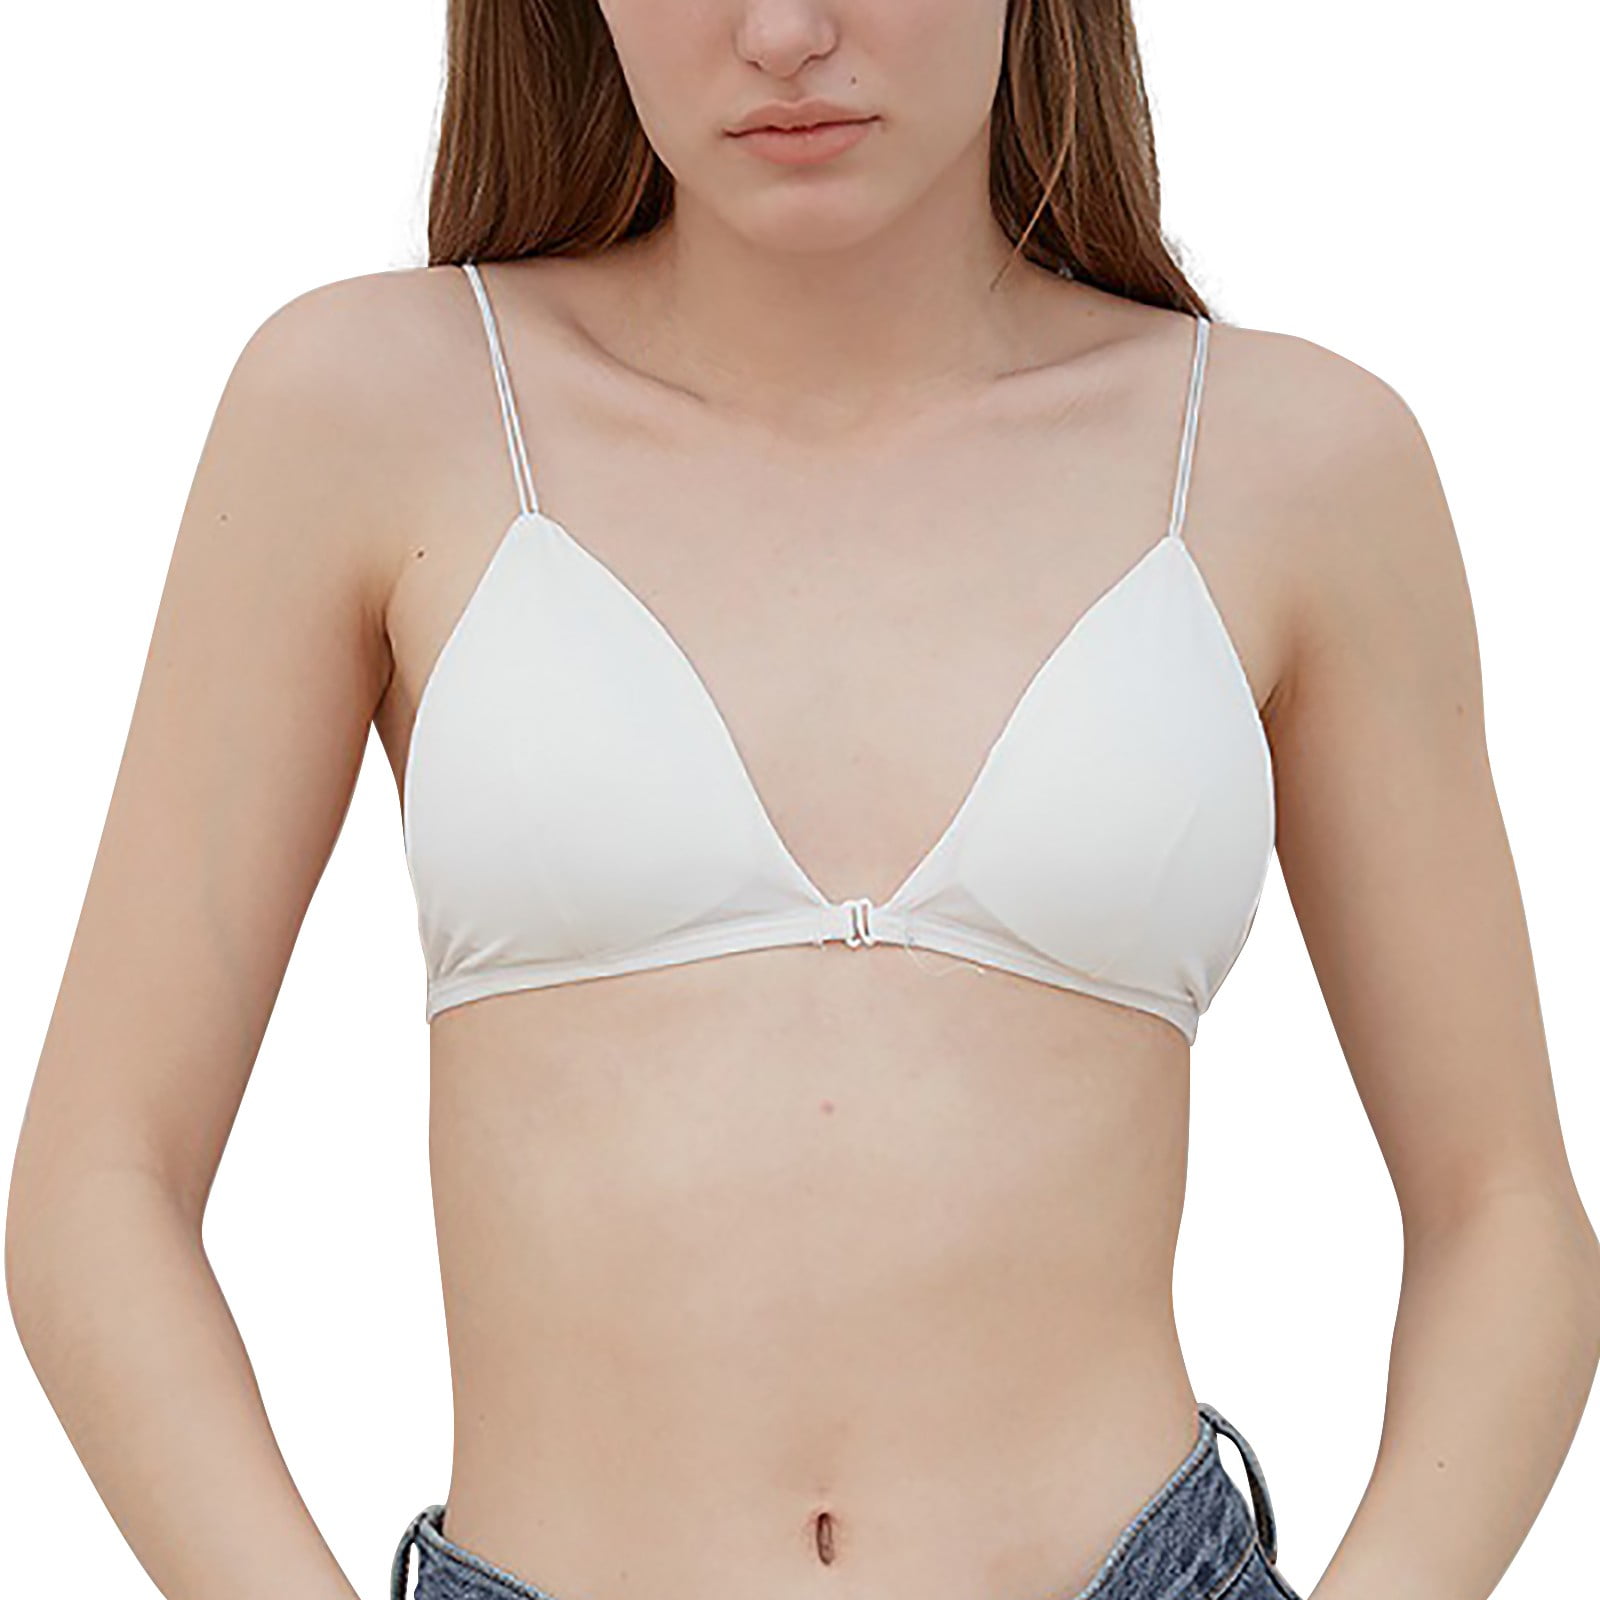 Baycosin Bralette For Women Girls Teens Low Support Triangle V